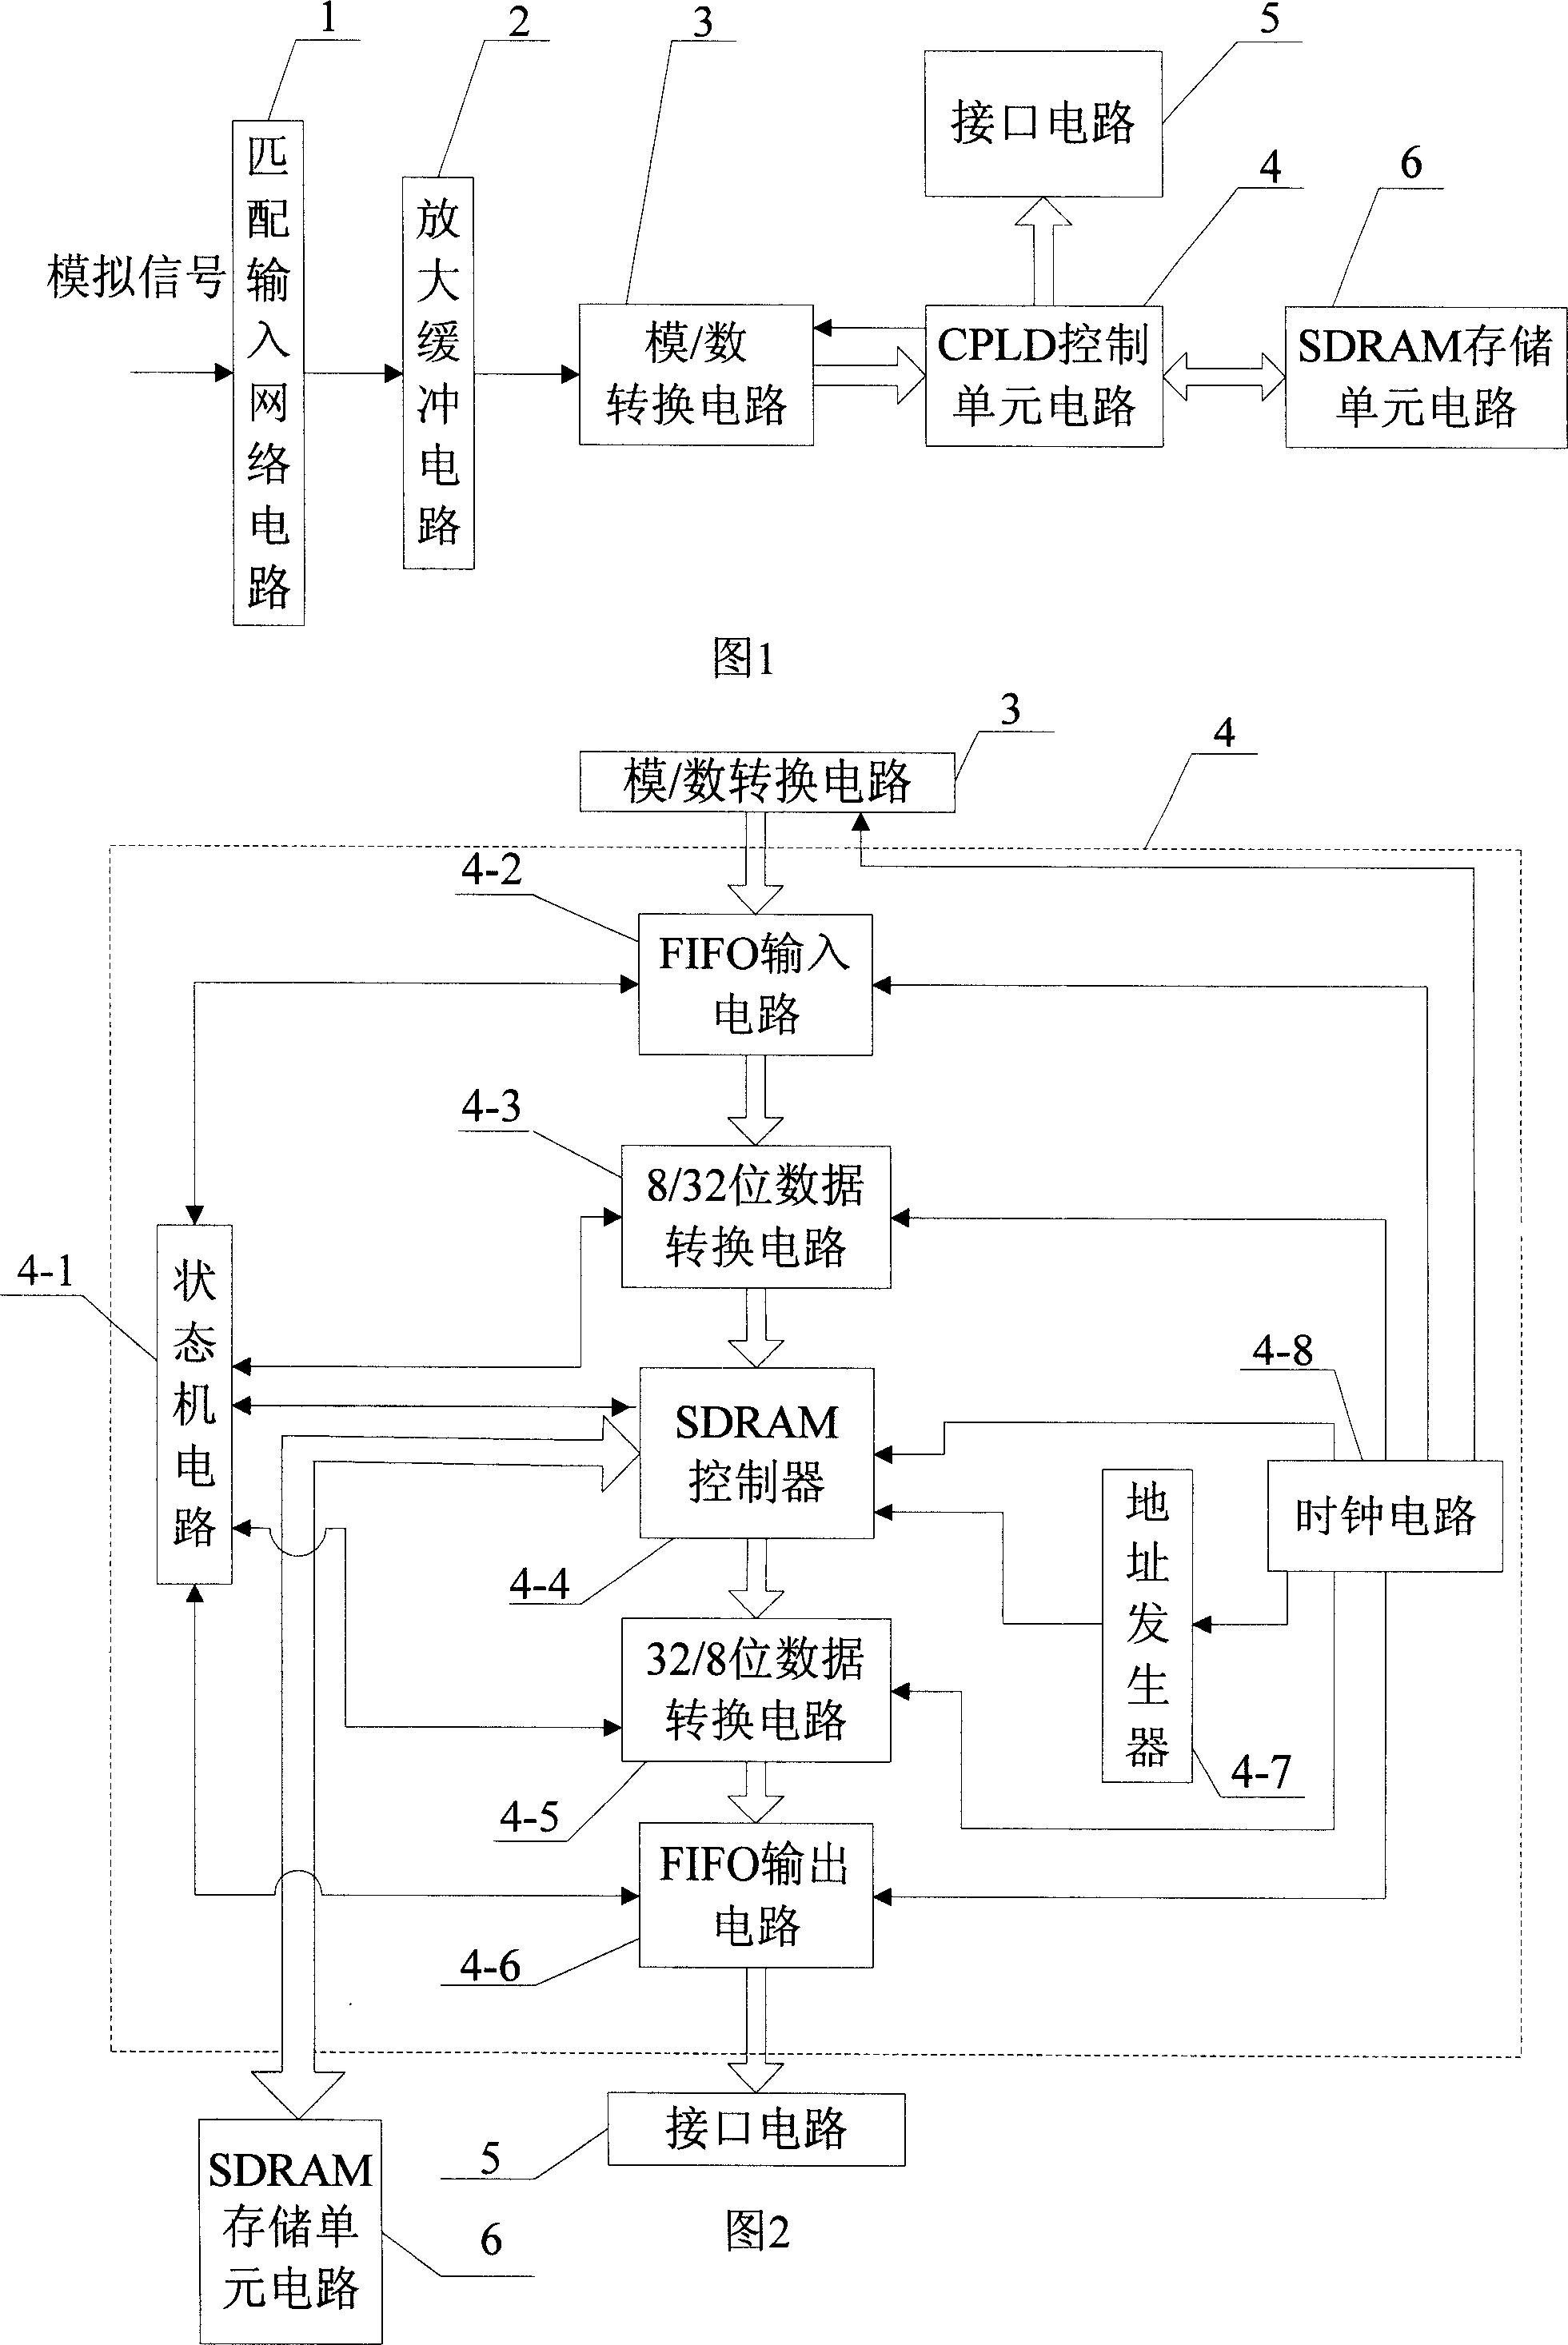 High-speed large-capacity data collecting system based on CPLD and SDRAM